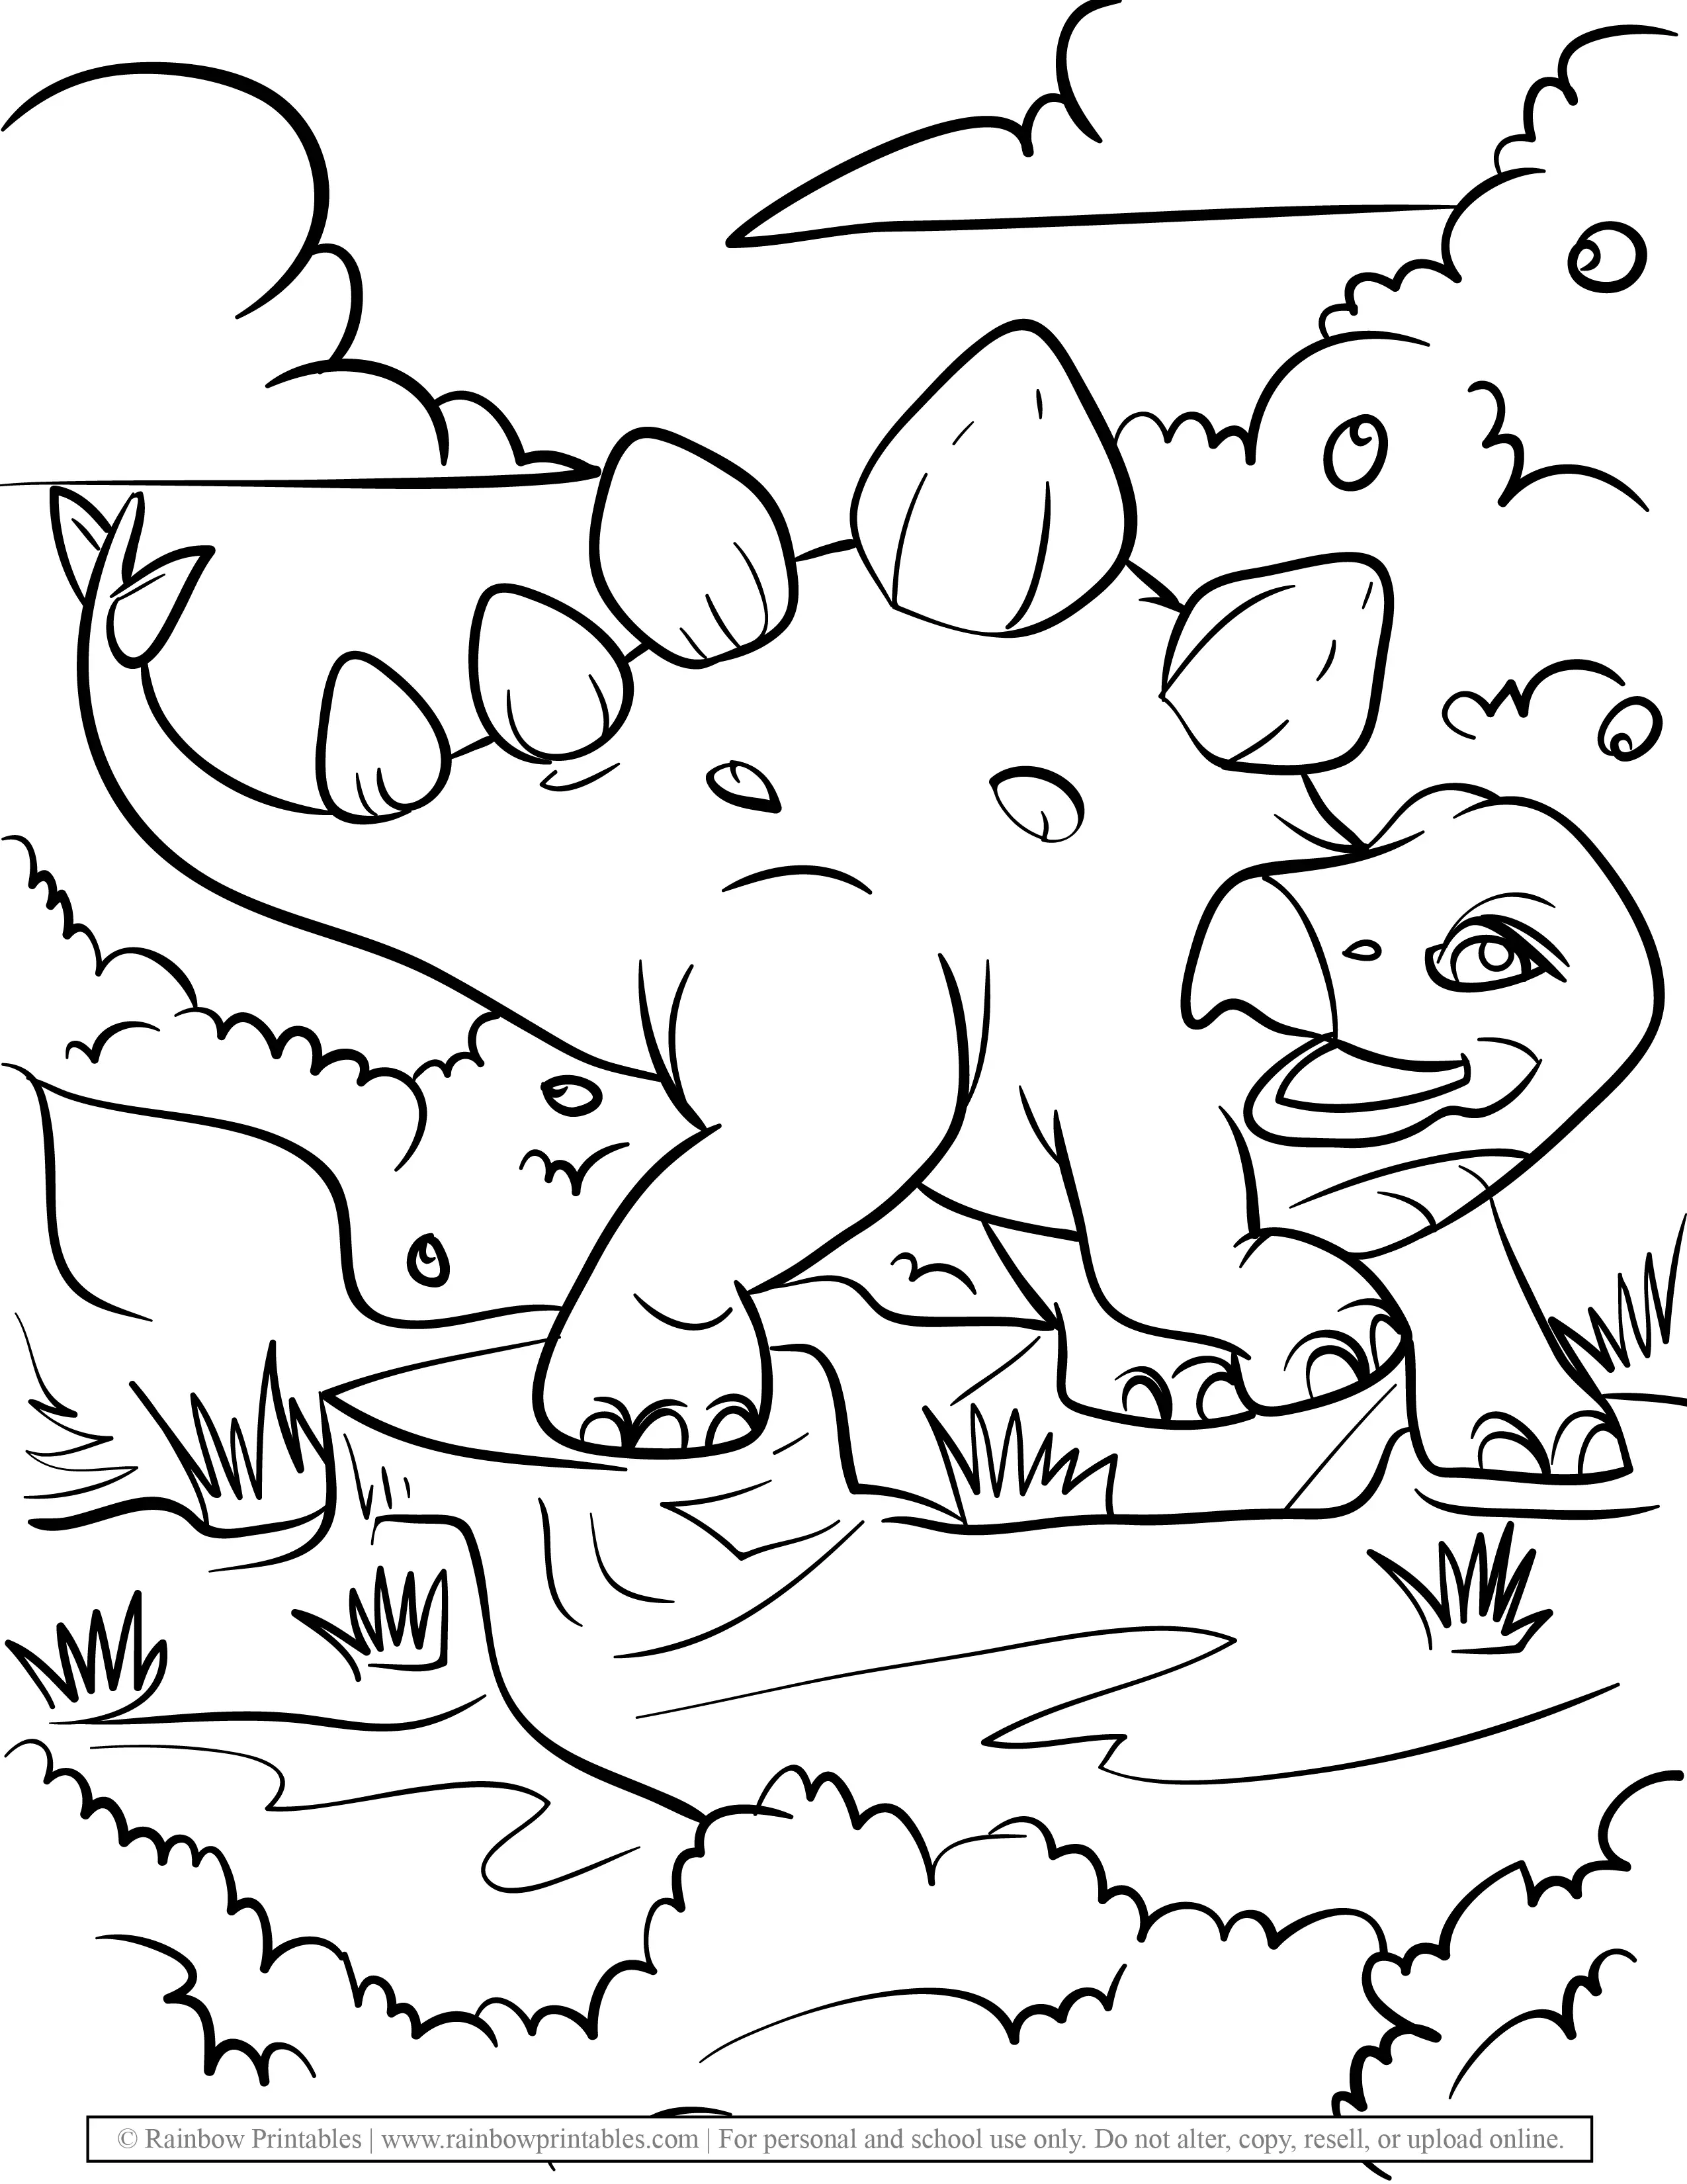 CUTE Stegosaurus Dinosaur Dino in Grassy Swamp Coloring Pages for Kids Extinct Animals